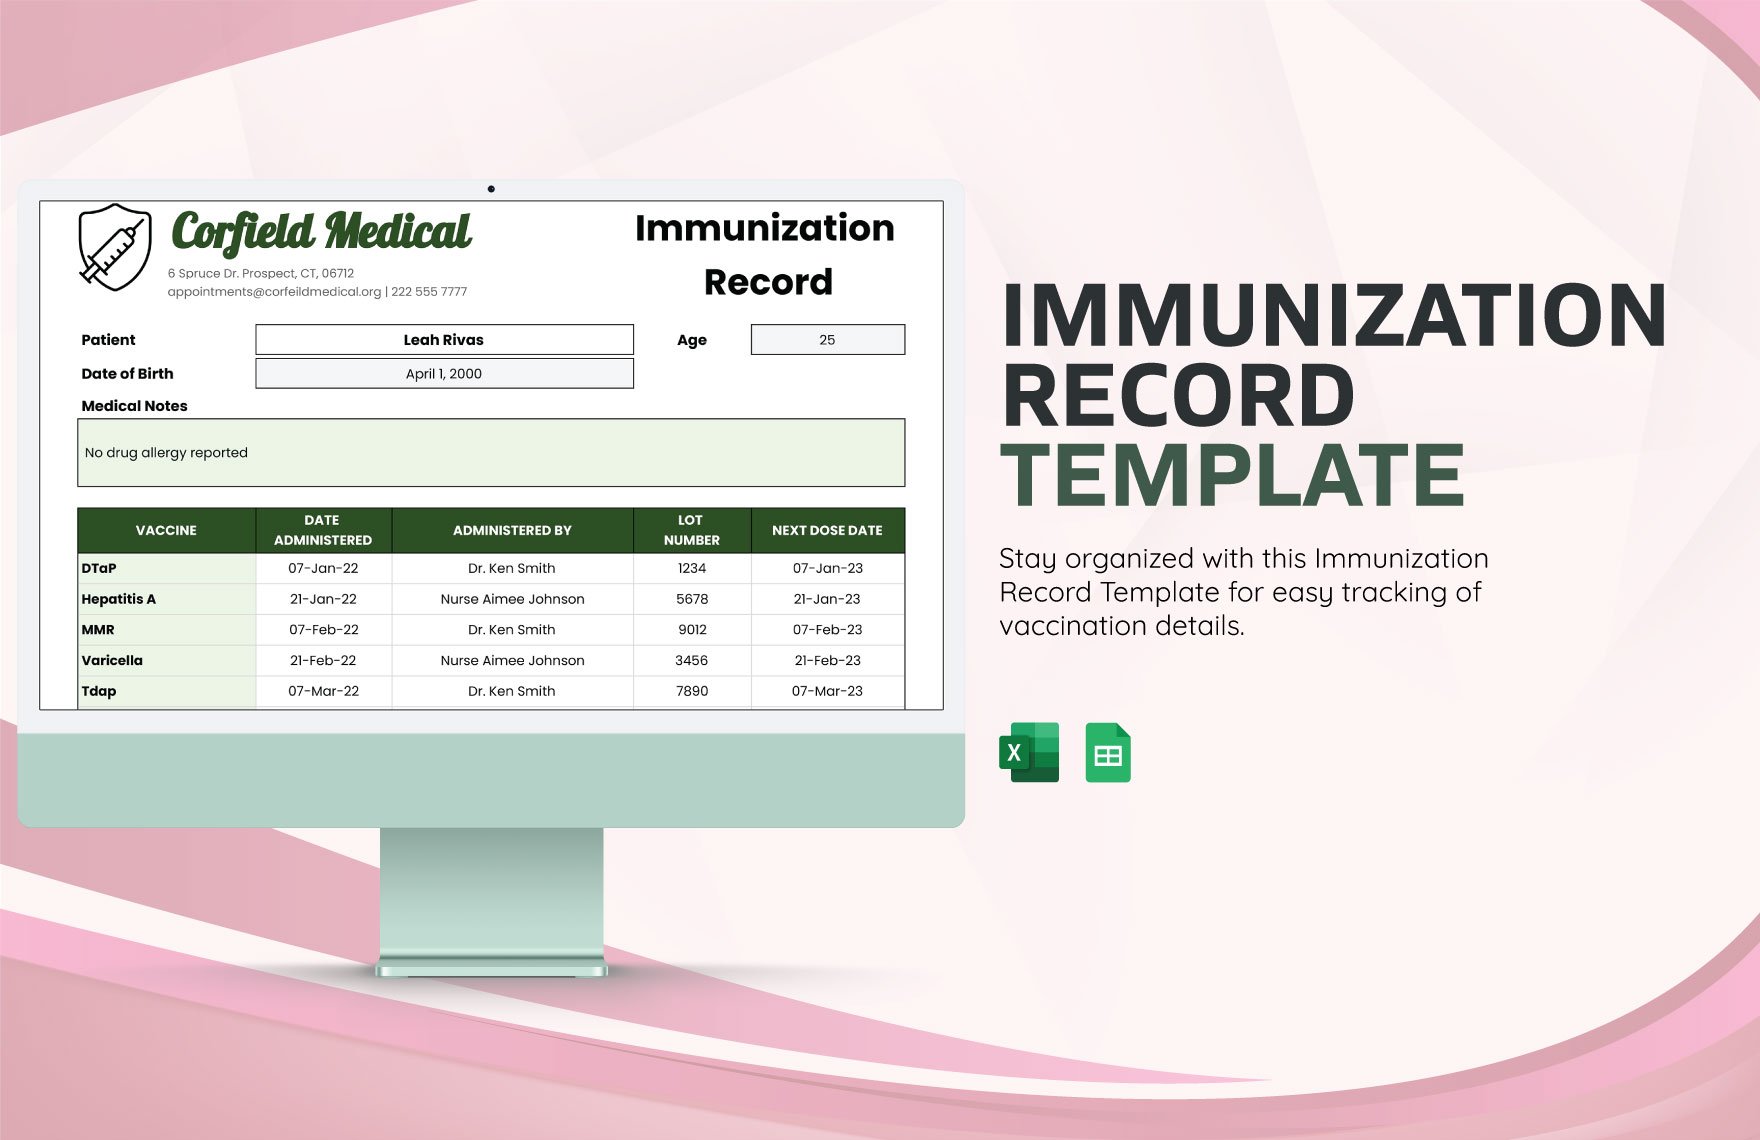 Immunization Record Template in Excel, Google Sheets